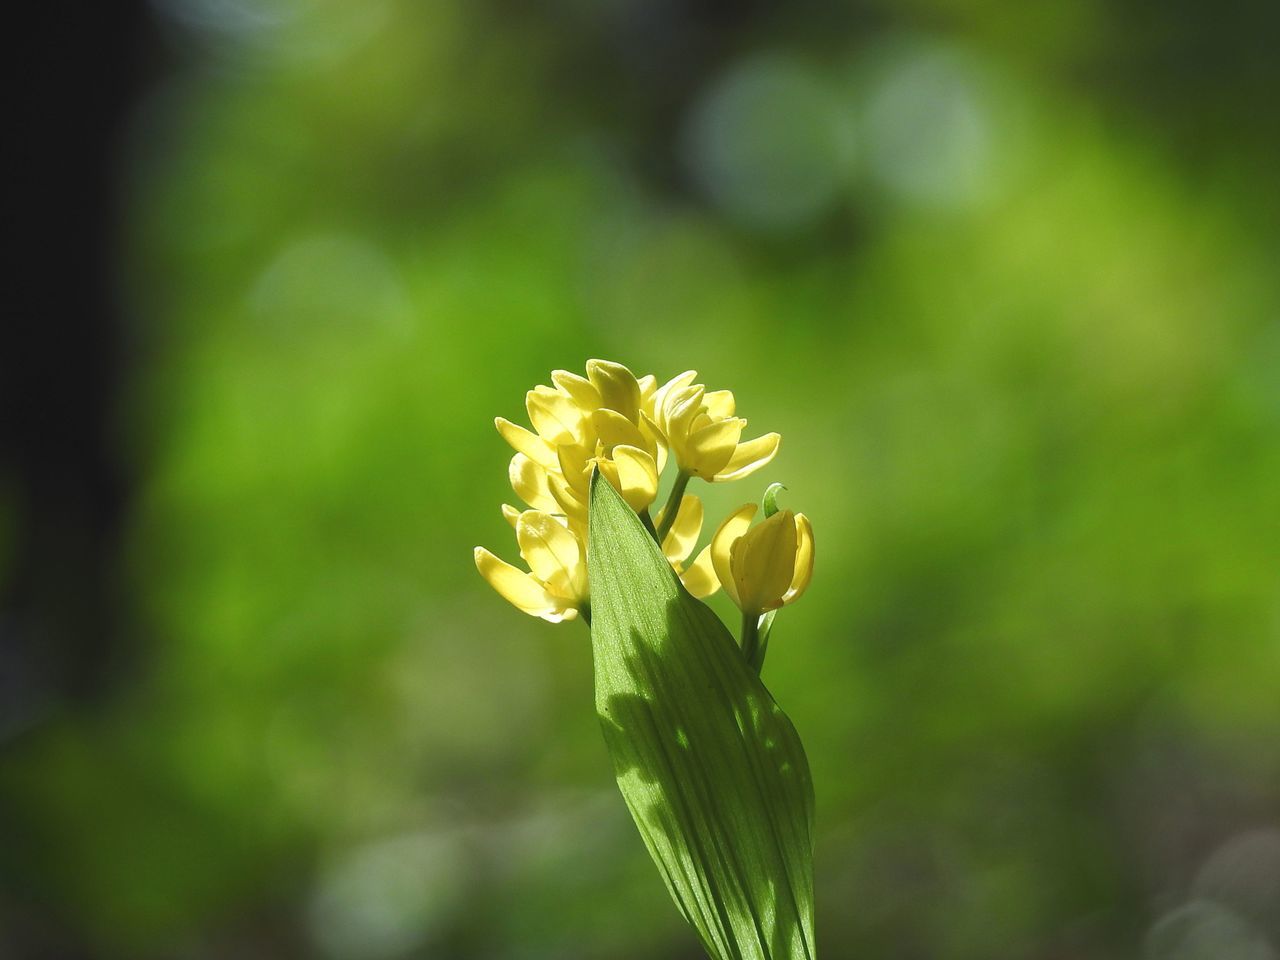 flowering plant, flower, plant, fragility, freshness, vulnerability, beauty in nature, growth, close-up, petal, inflorescence, flower head, focus on foreground, nature, yellow, day, green color, no people, outdoors, sepal